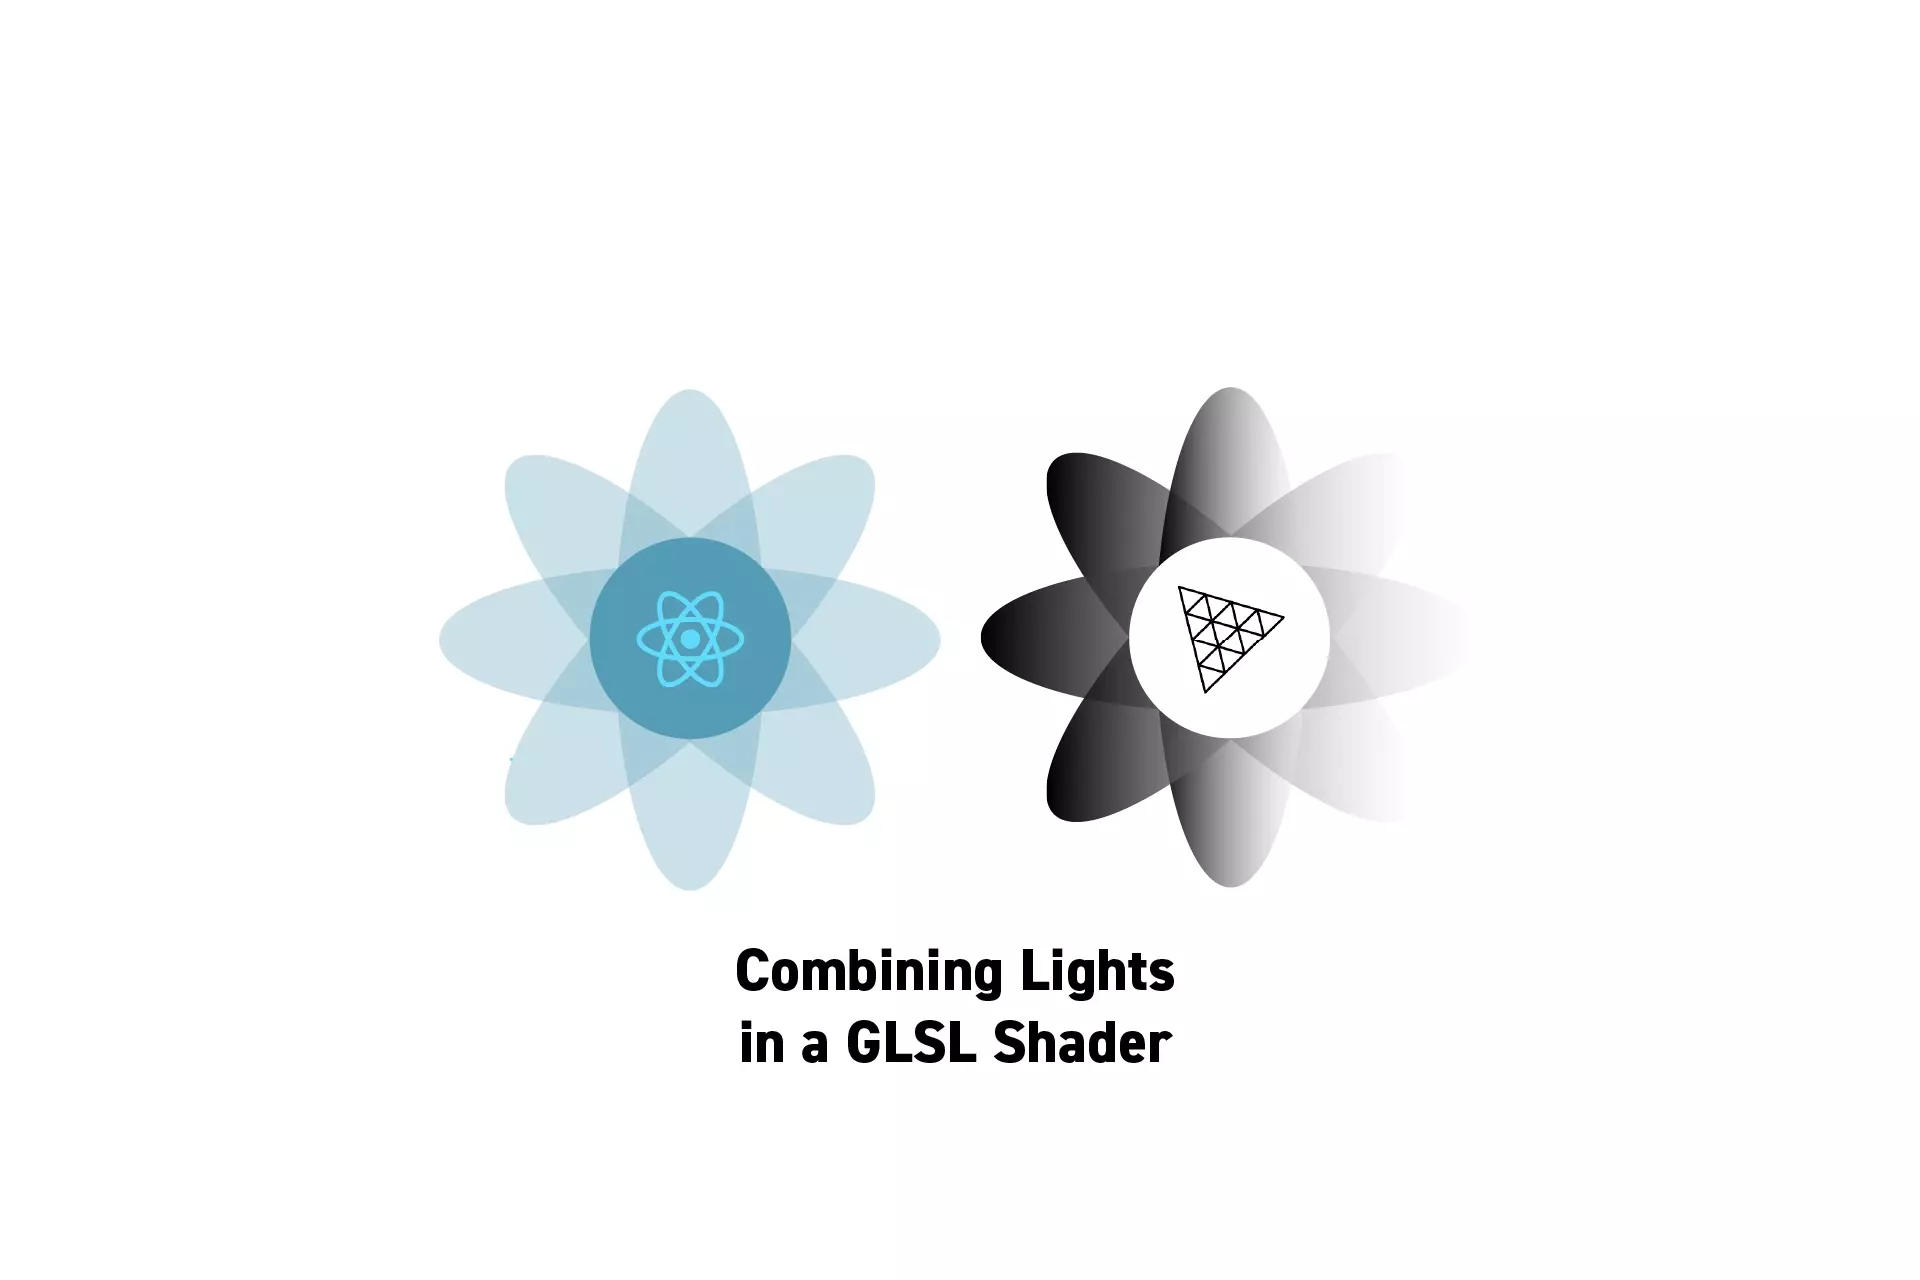 Two flowers that represent ReactJS and ThreeJS with the text "Combining Lights in a GLSL Shader" beneath them.